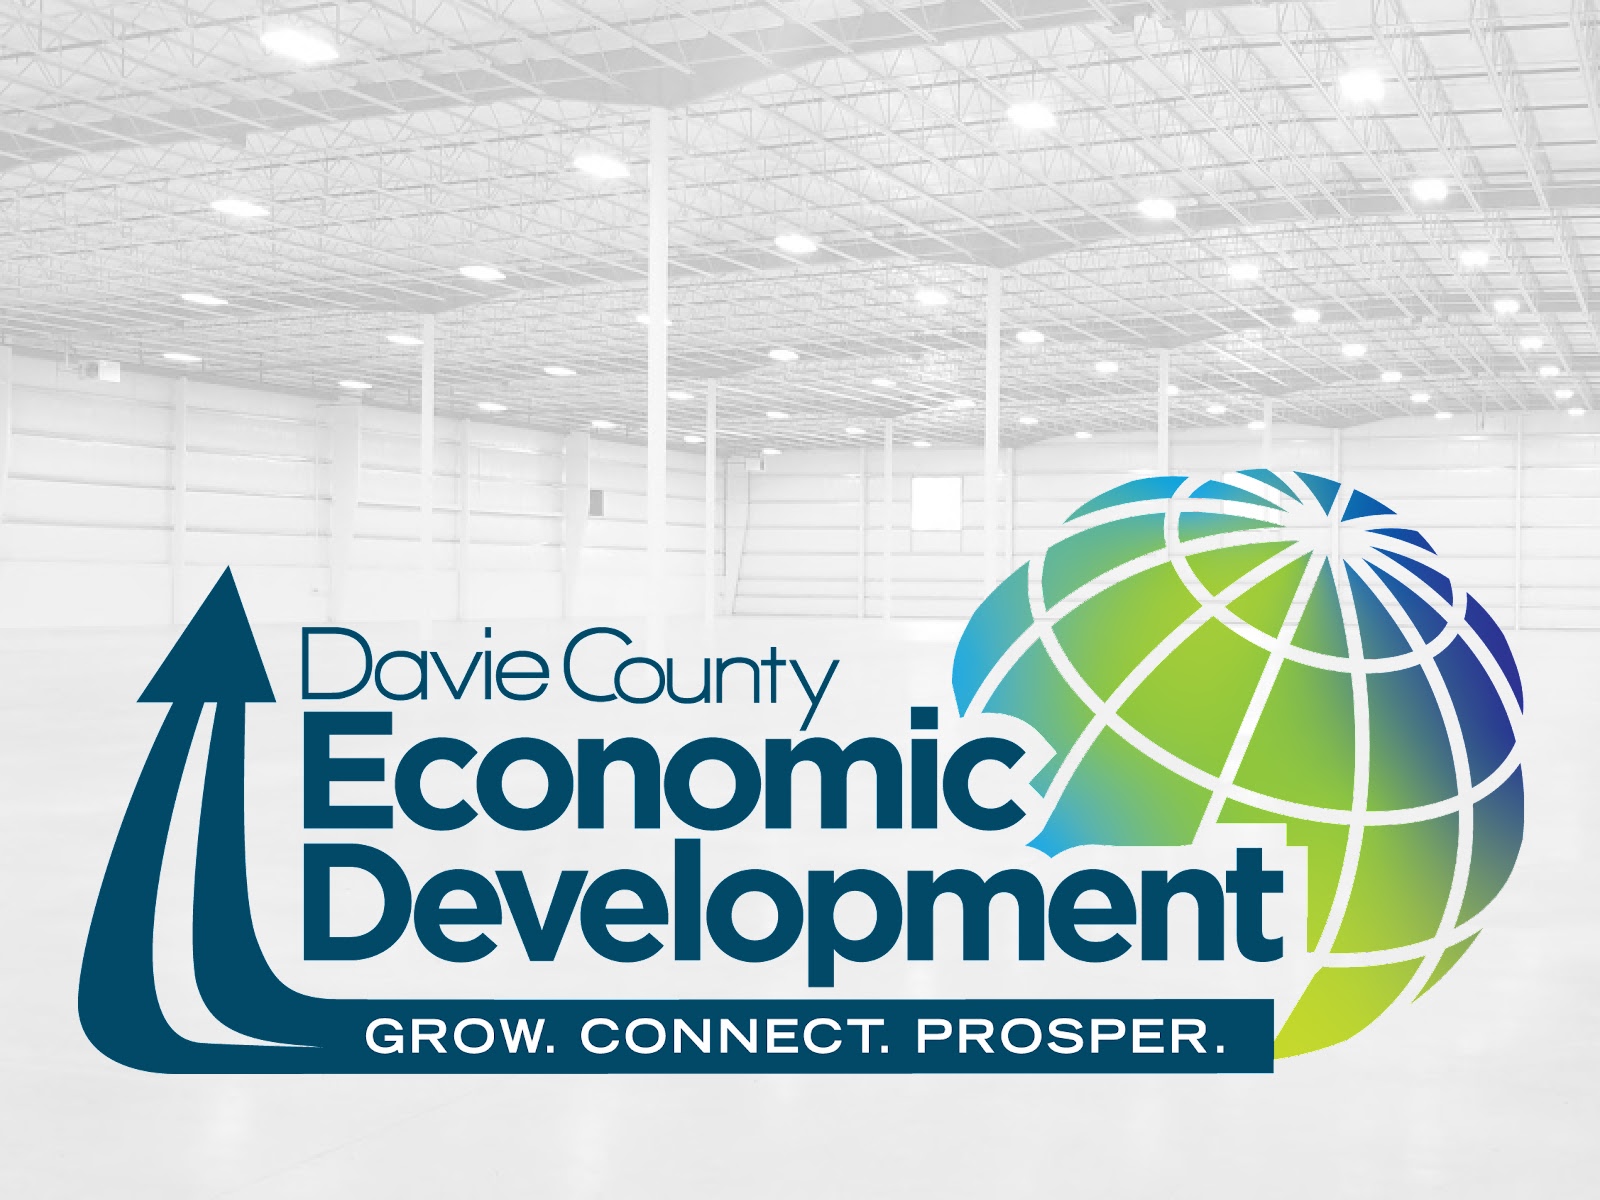 Spec building in the town of Mocksville with the Davie County Economic Development Logo. 